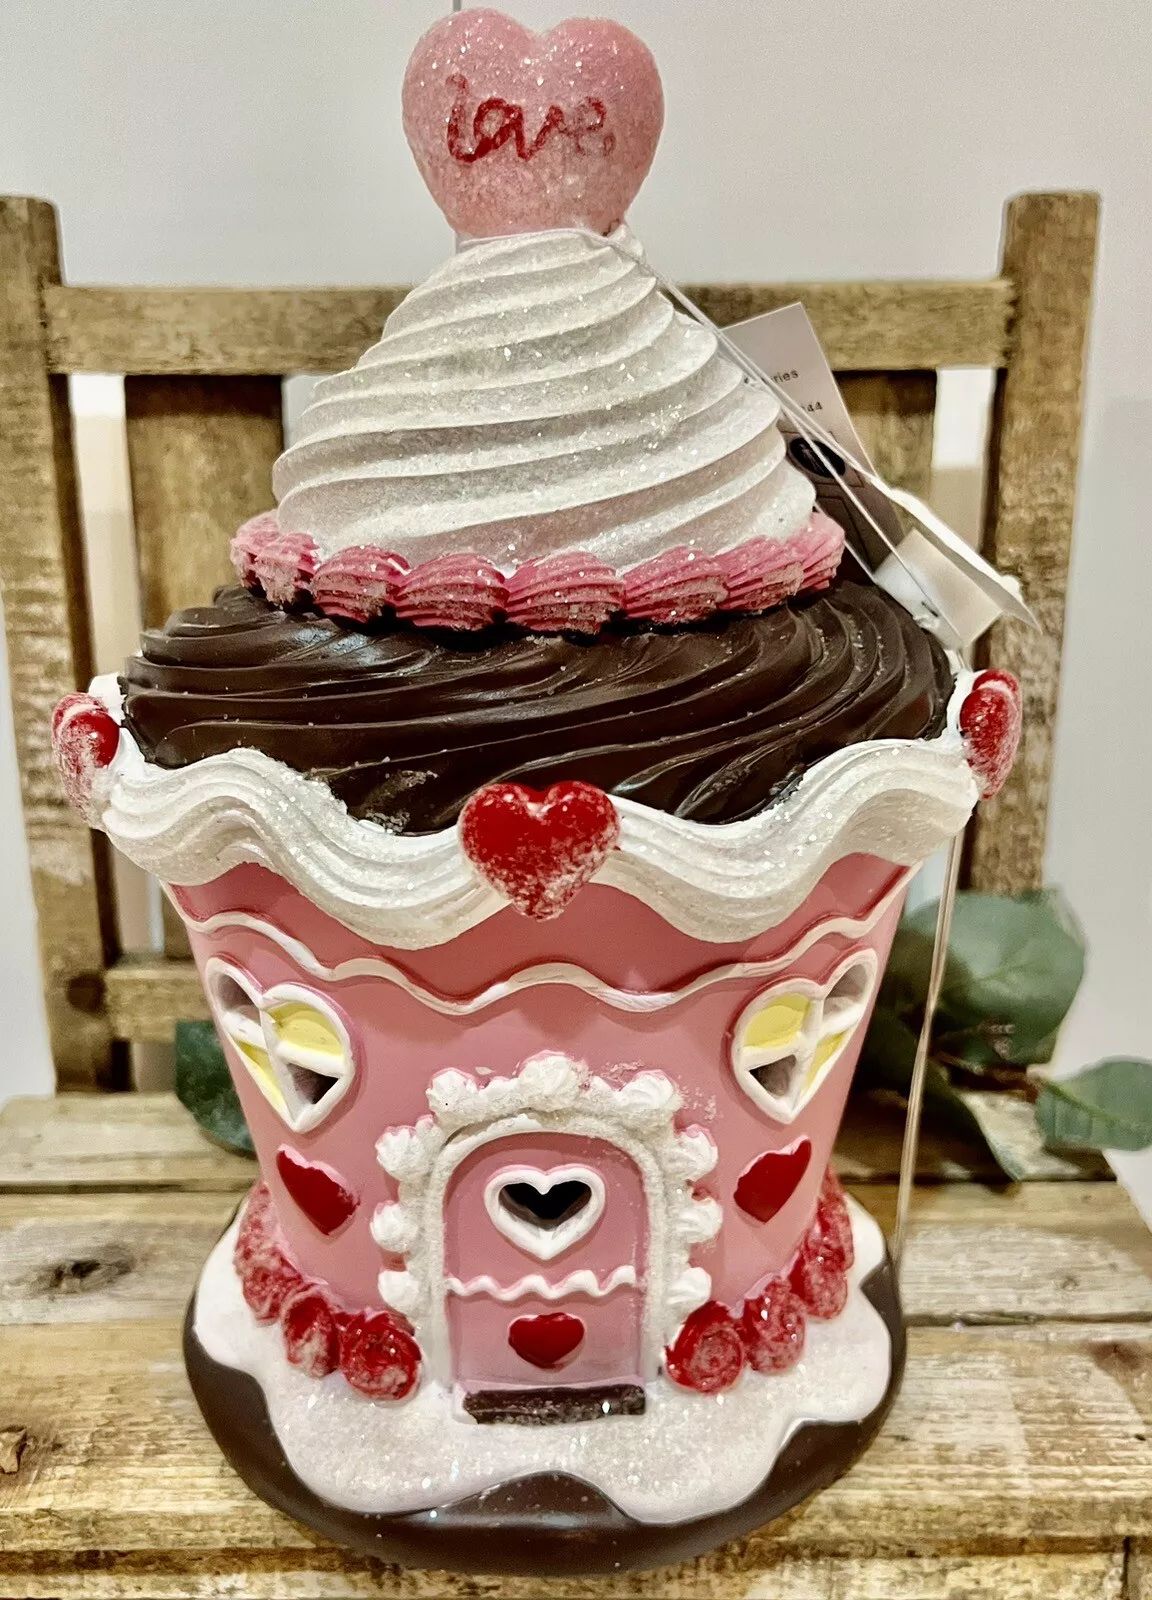 Valentine’s Day Cupcake Gingerbread House Light Up Pink Red Hearts Frosting New | eBay US